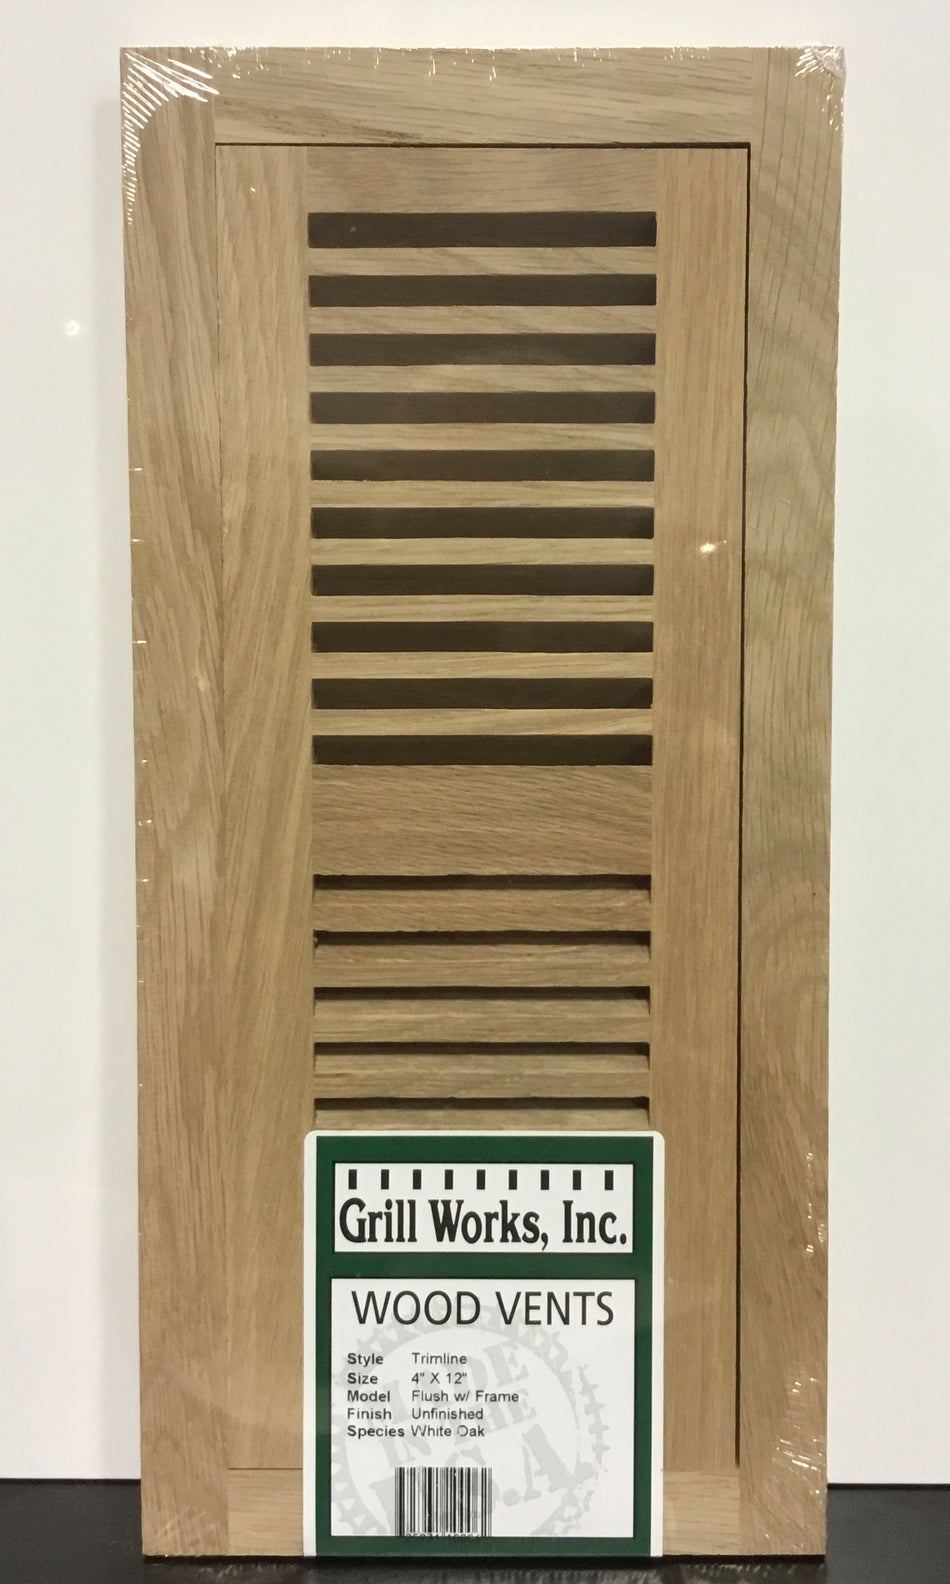 Grill Works Trimline Unfinished White Oak 4"x12" Flush with Frame